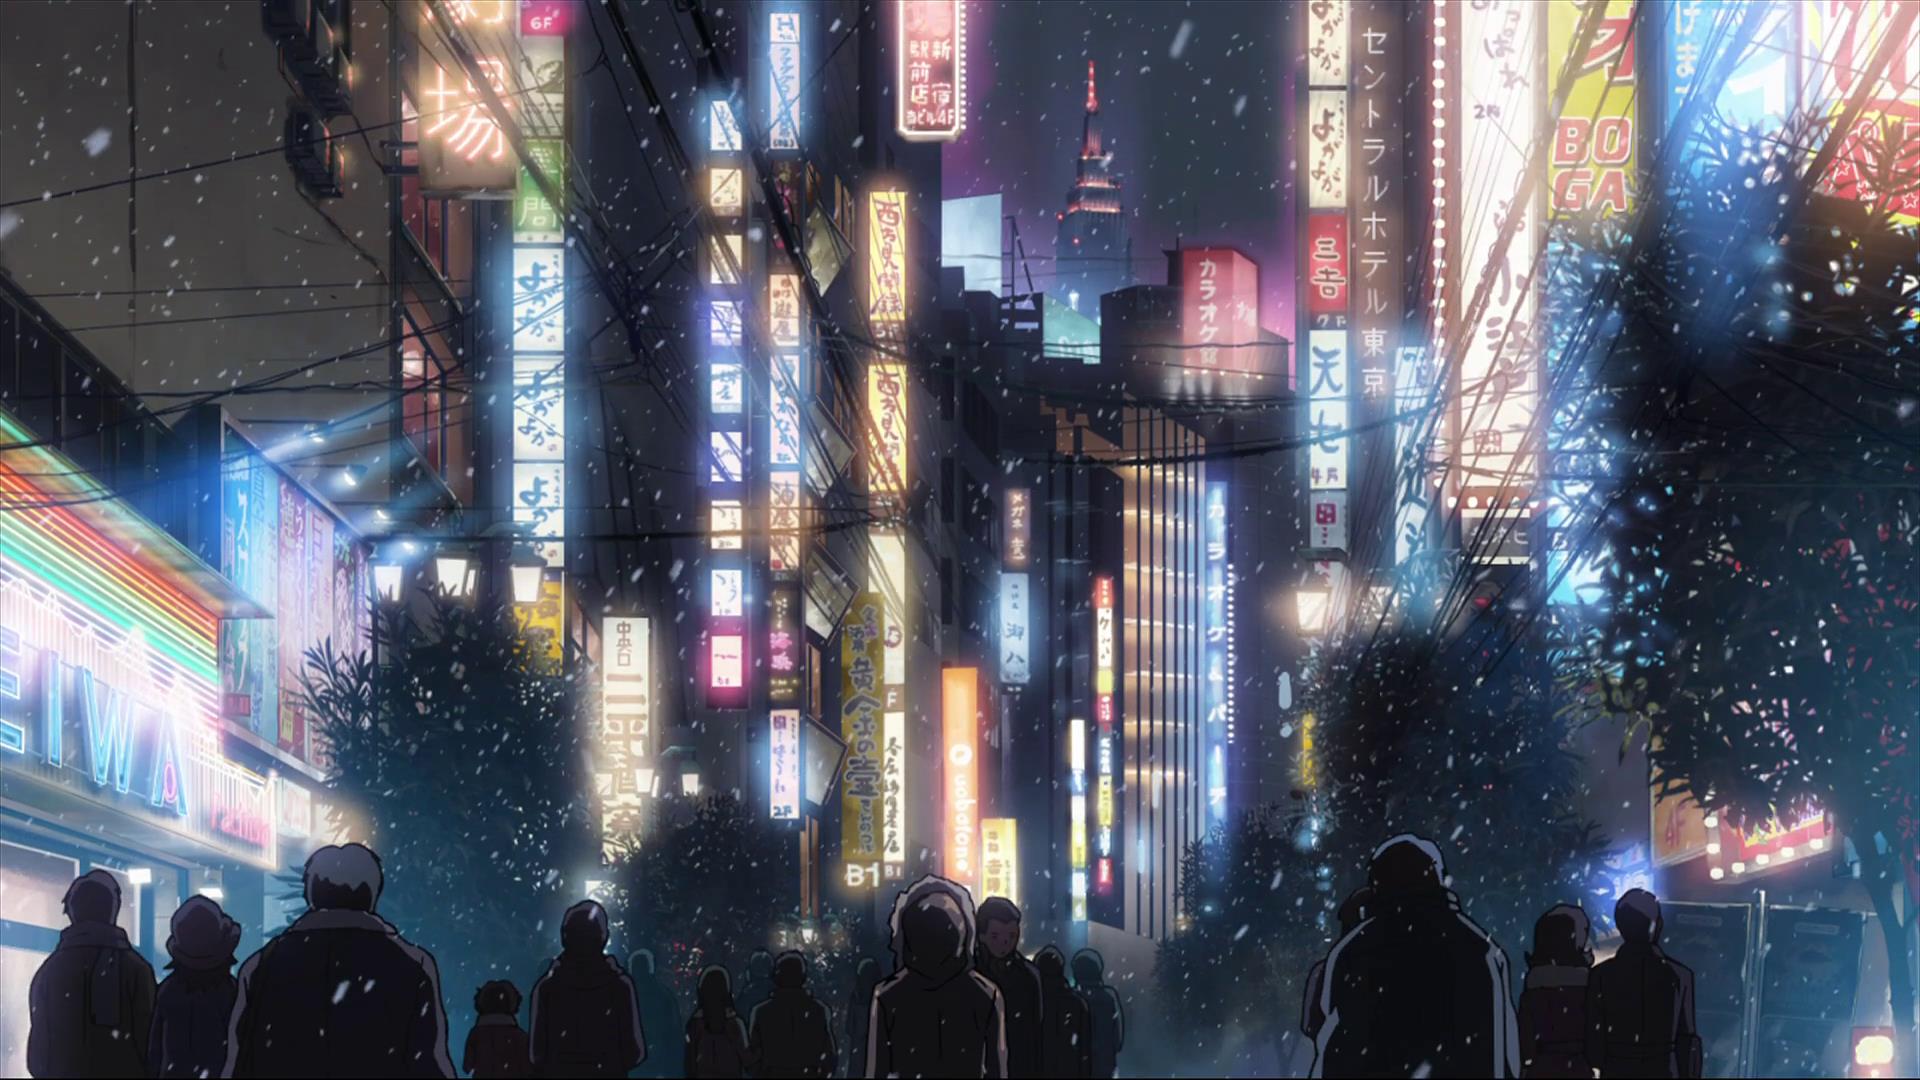 400+] Anime City Wallpapers | Wallpapers.com